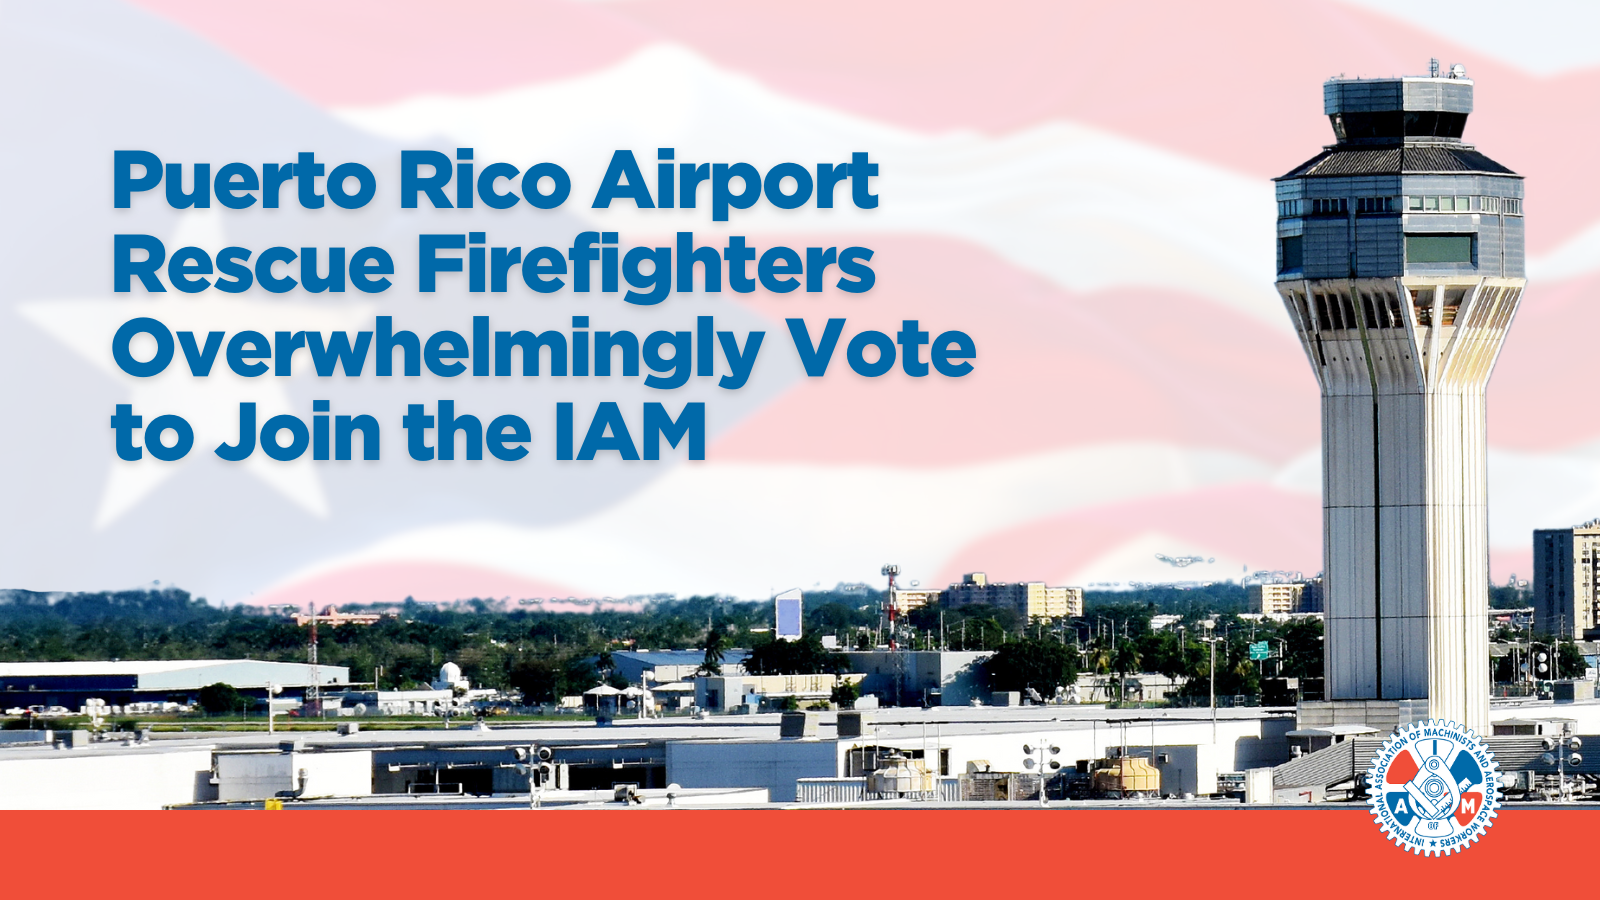 Puerto Rico Airport Rescue Firefighters Overwhelmingly Vote to Join the IAM